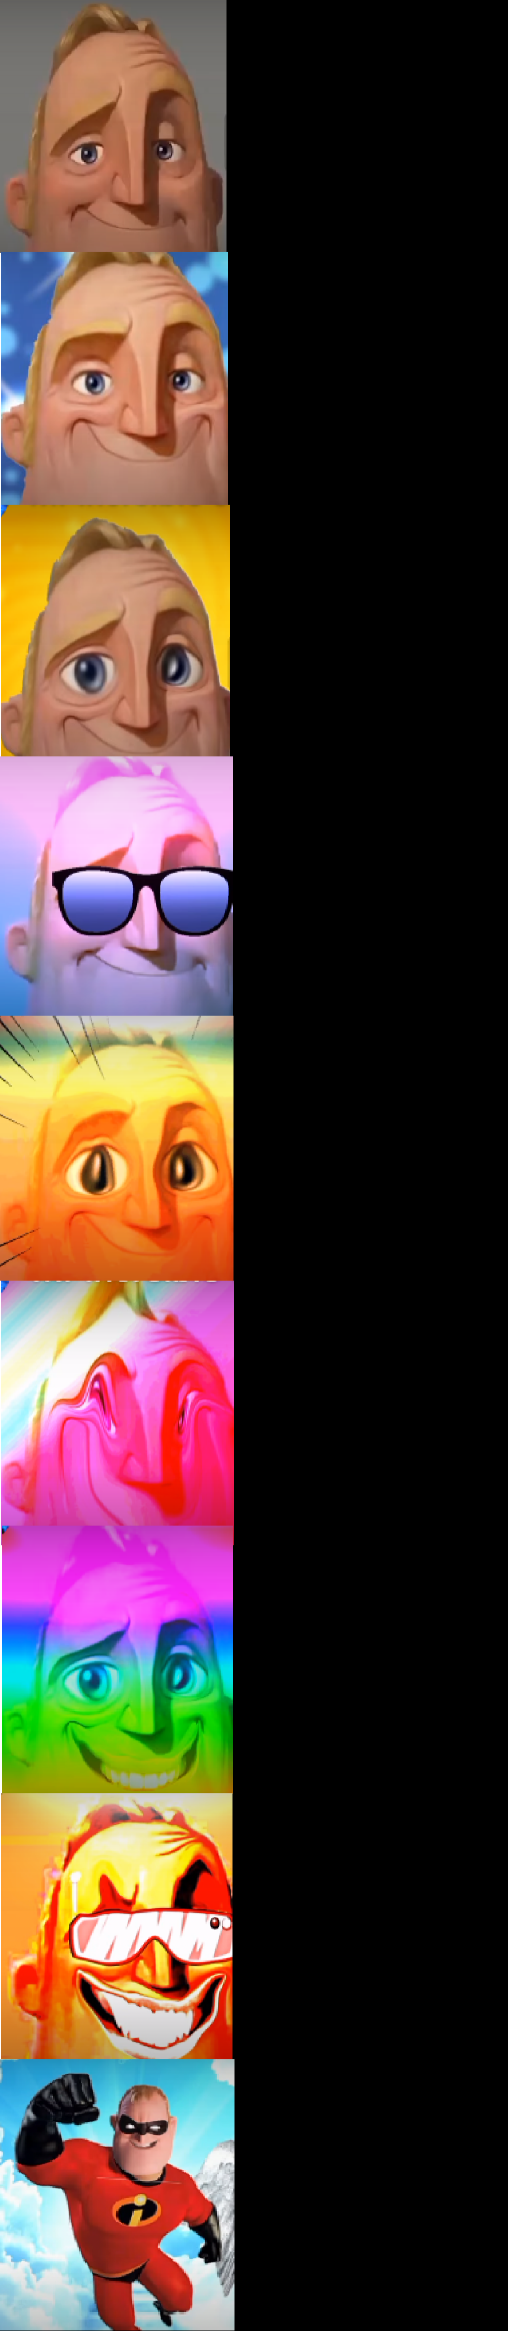 High Quality Mr Incredible becoming entertained Blank Meme Template